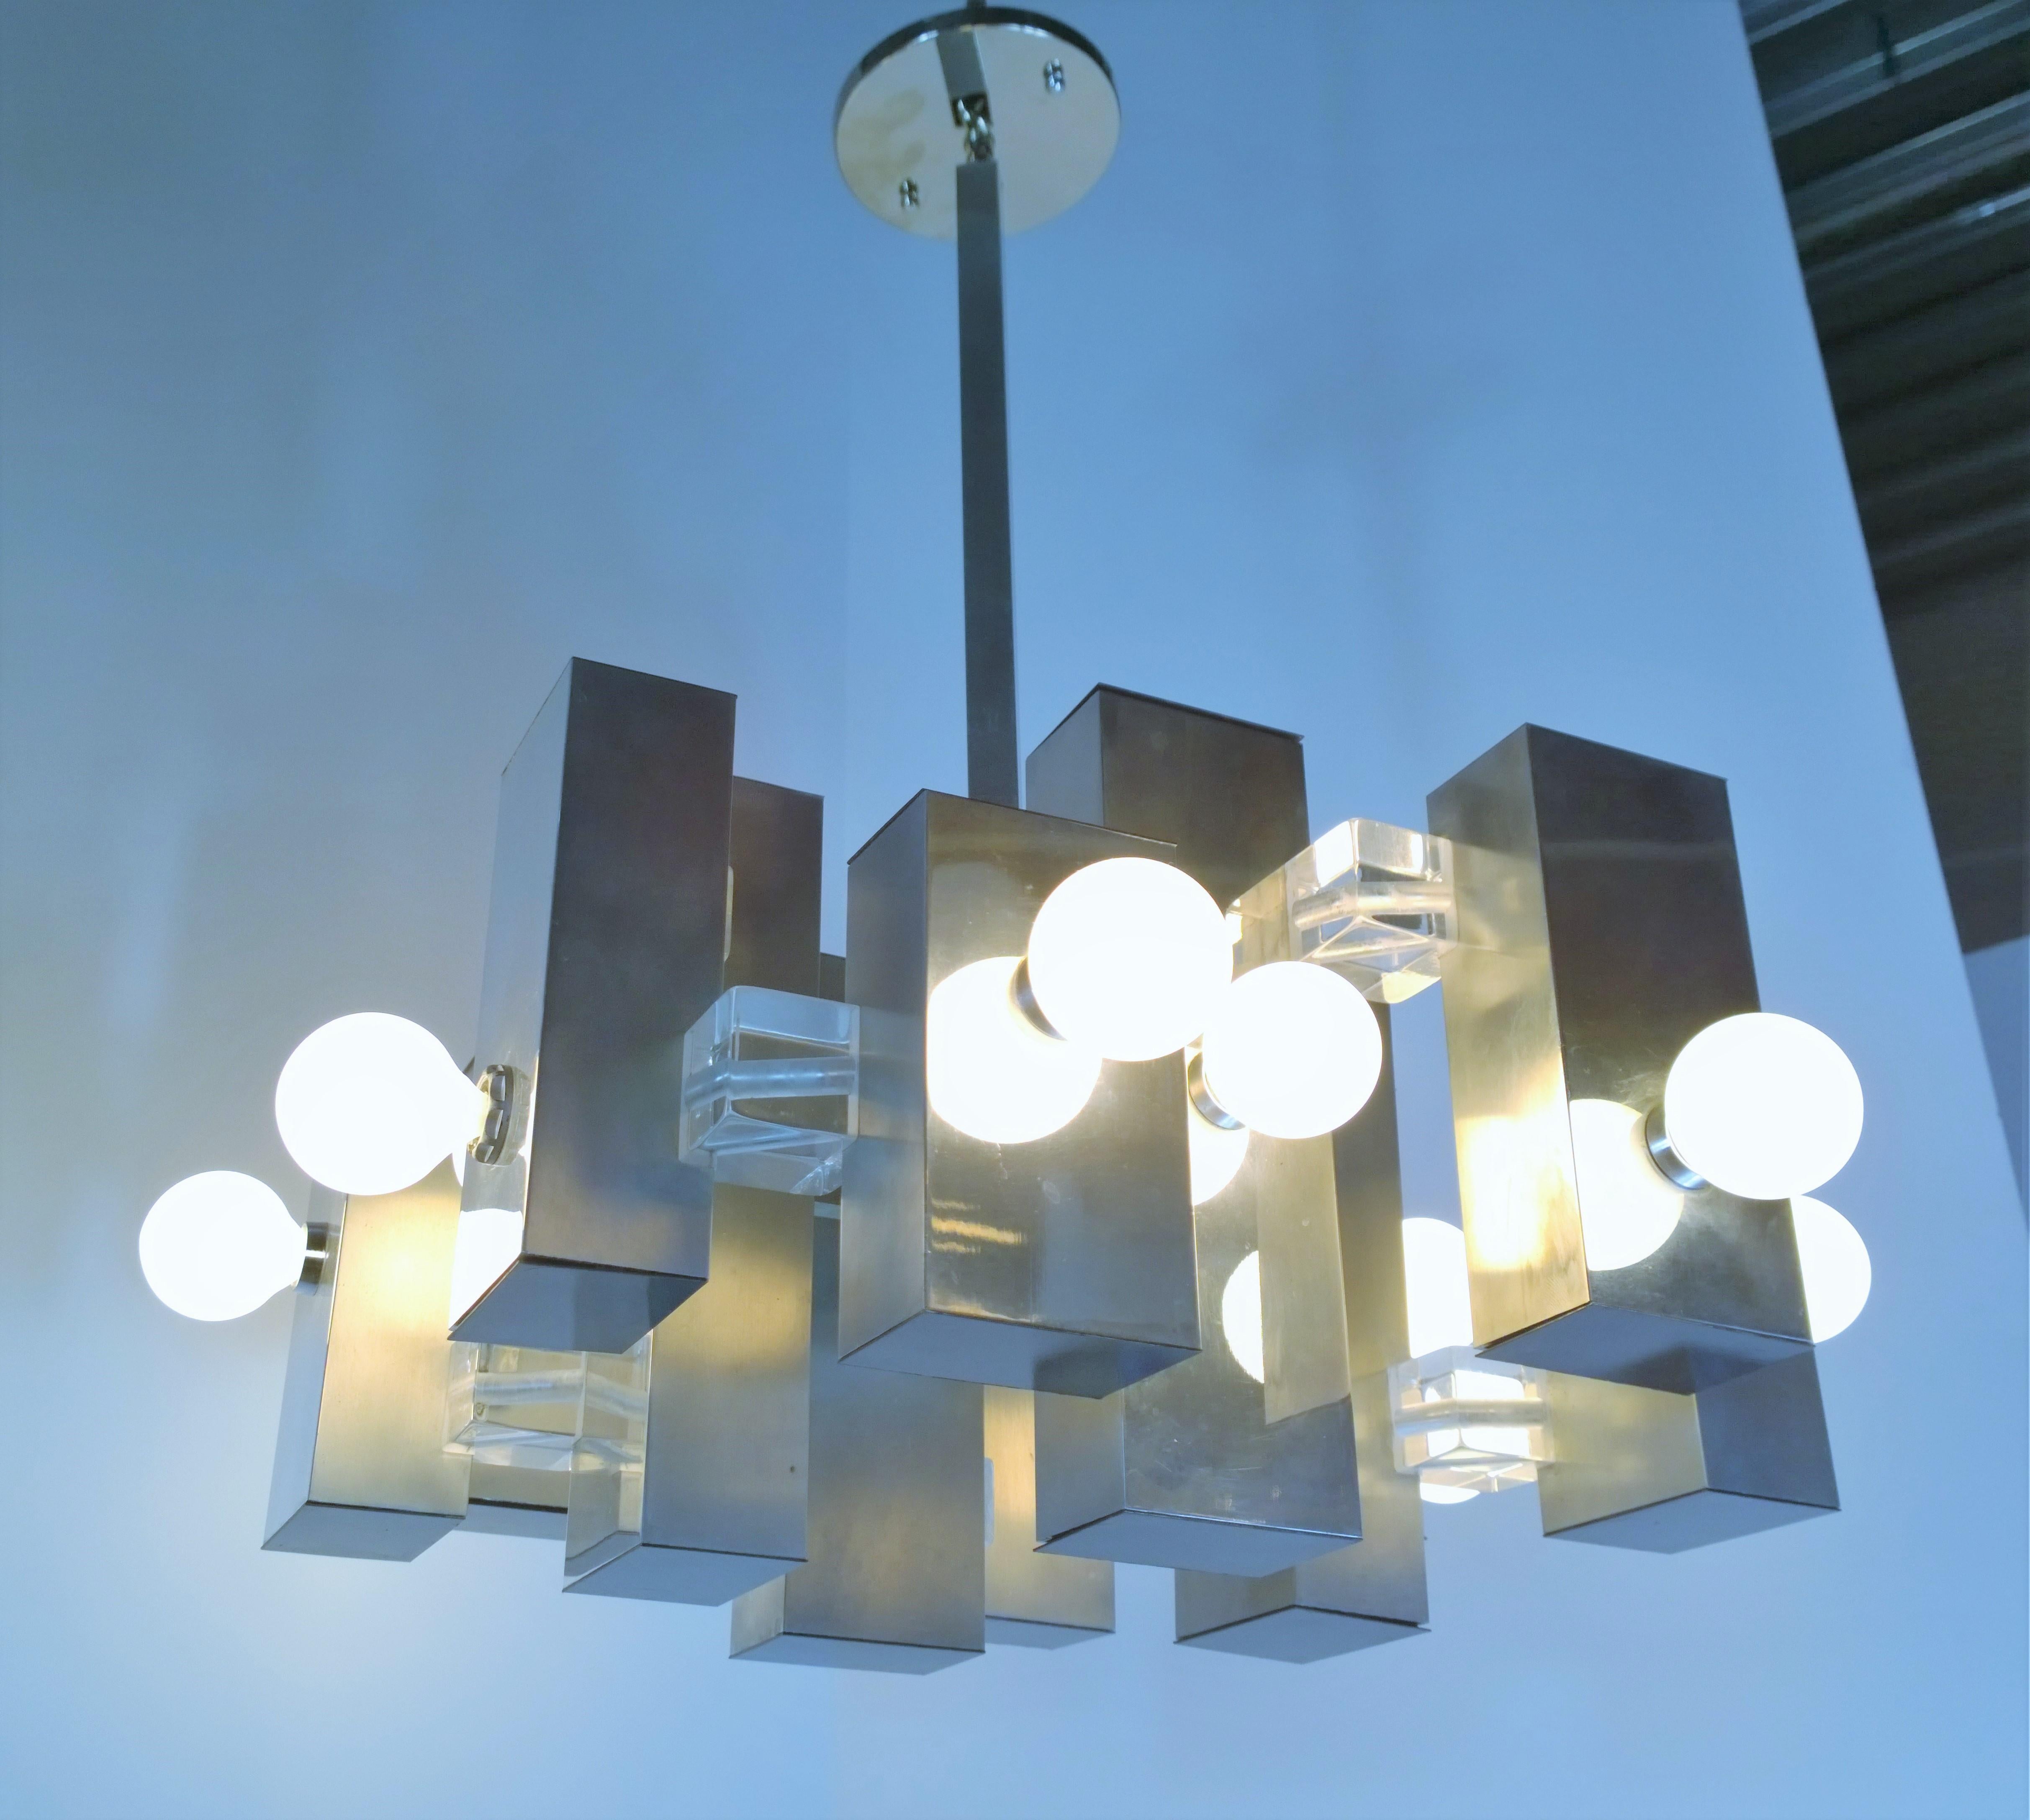 Offered is a Mid-Century Modern Italian Gaetano Sciolari Brutalist chandelier made up of rectangular pieces of stainless steel alternating between mirror finished sides and brushed finished sides capped on tops and bottoms with black painted steel.